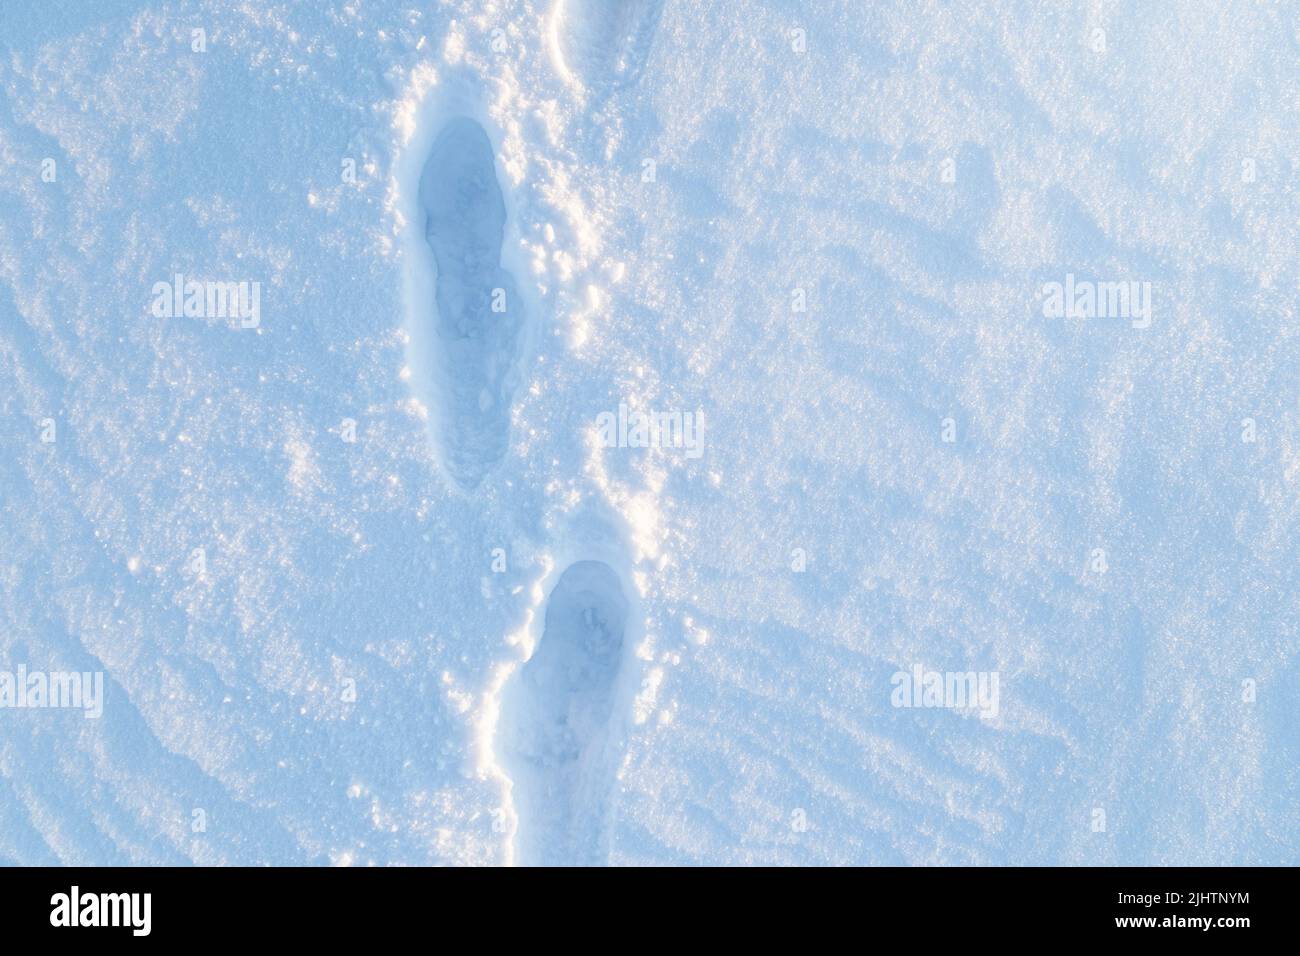 Fresh snowy ground with footsteps on a sunny day in the winter, viewed from above. Stock Photo